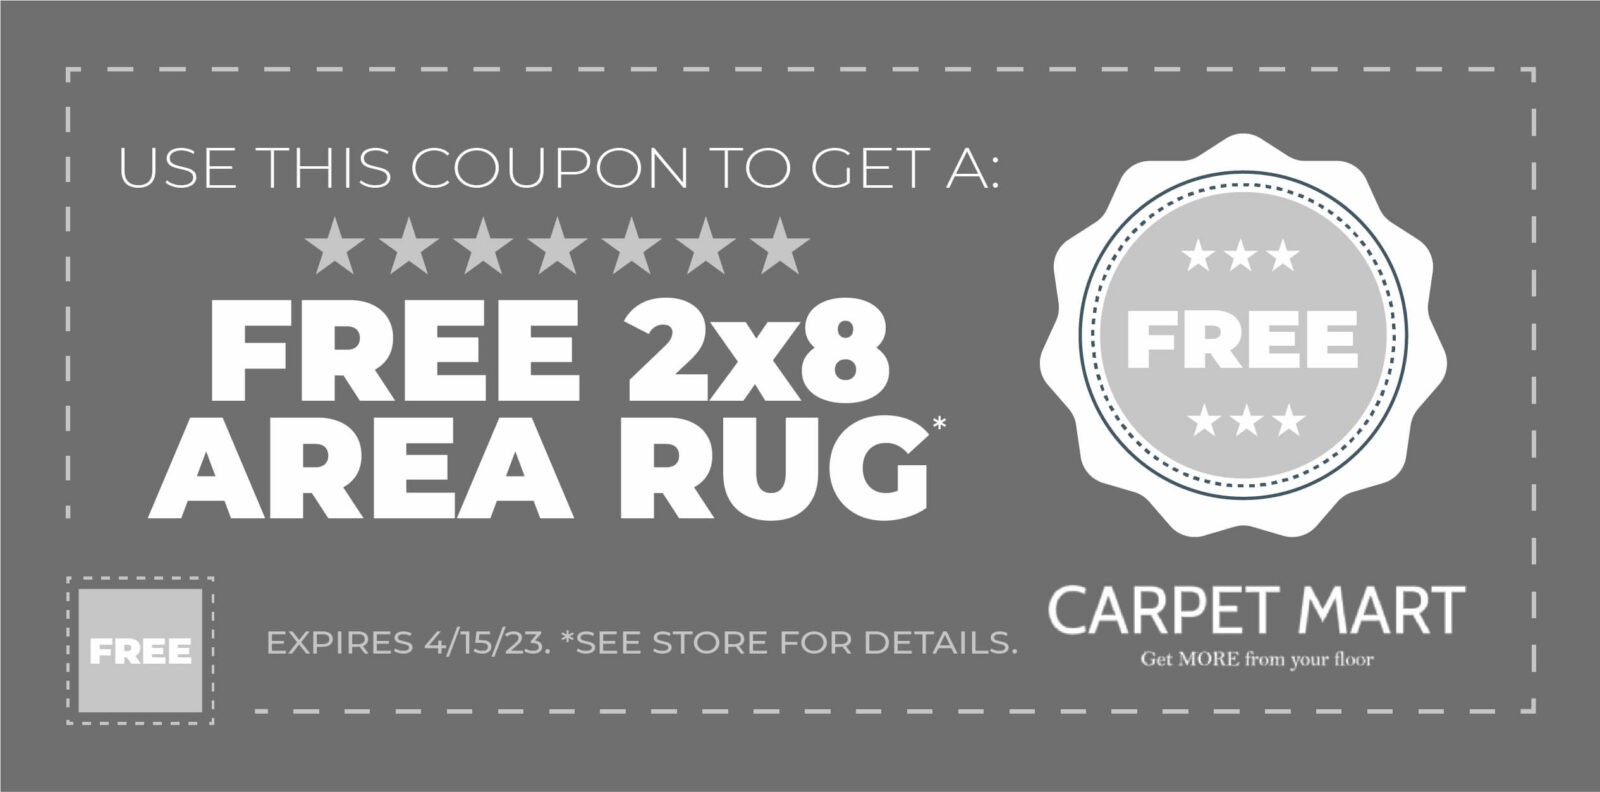 Use this coupon to get a free 2x8 area rug | Carpet Mart